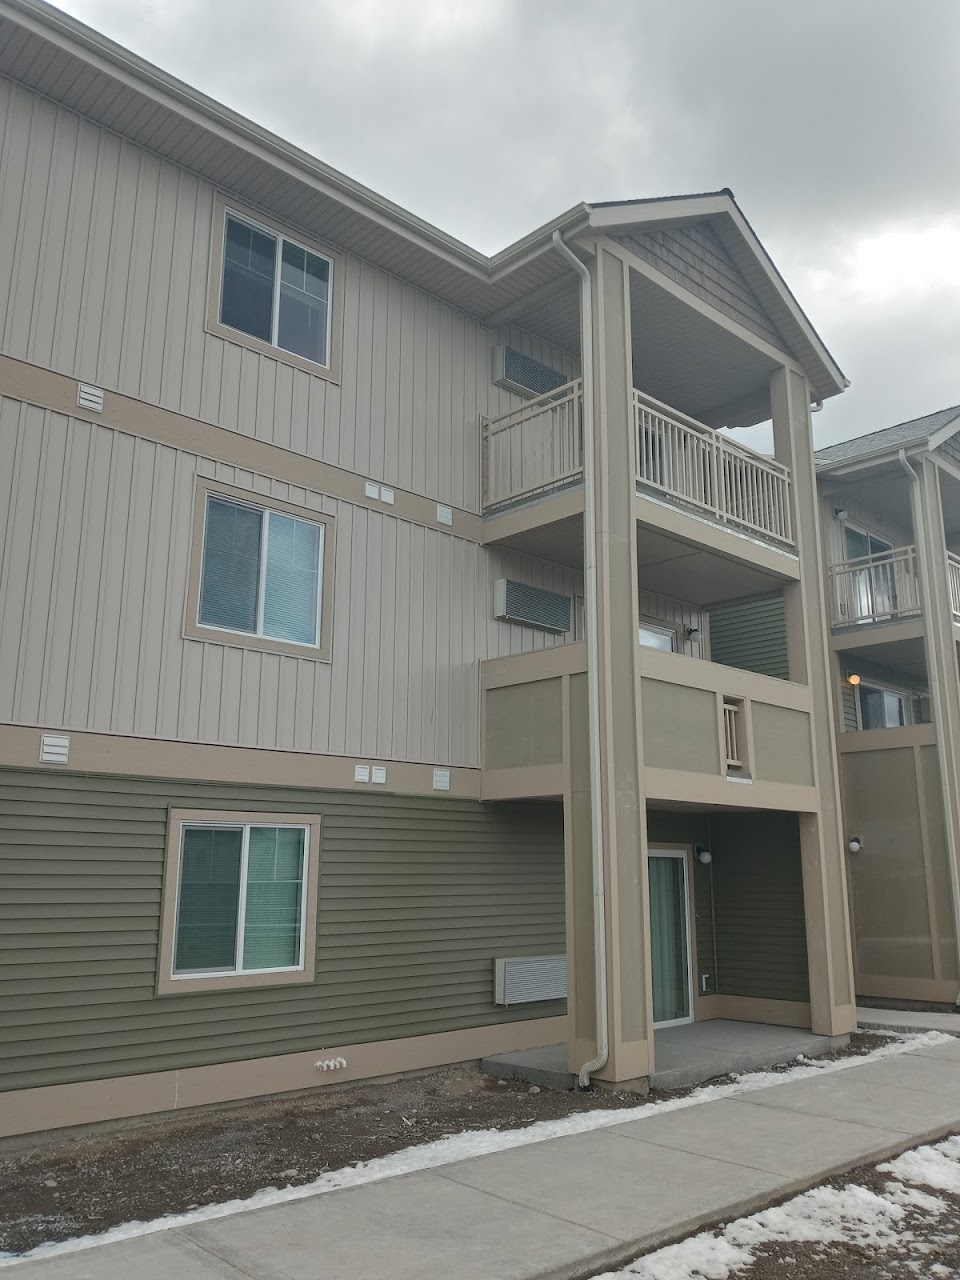 Photo of WINTER HEIGHTS. Affordable housing located at 2721 N. CHERRY STREET SPOKANE VALLEY, WA 99216